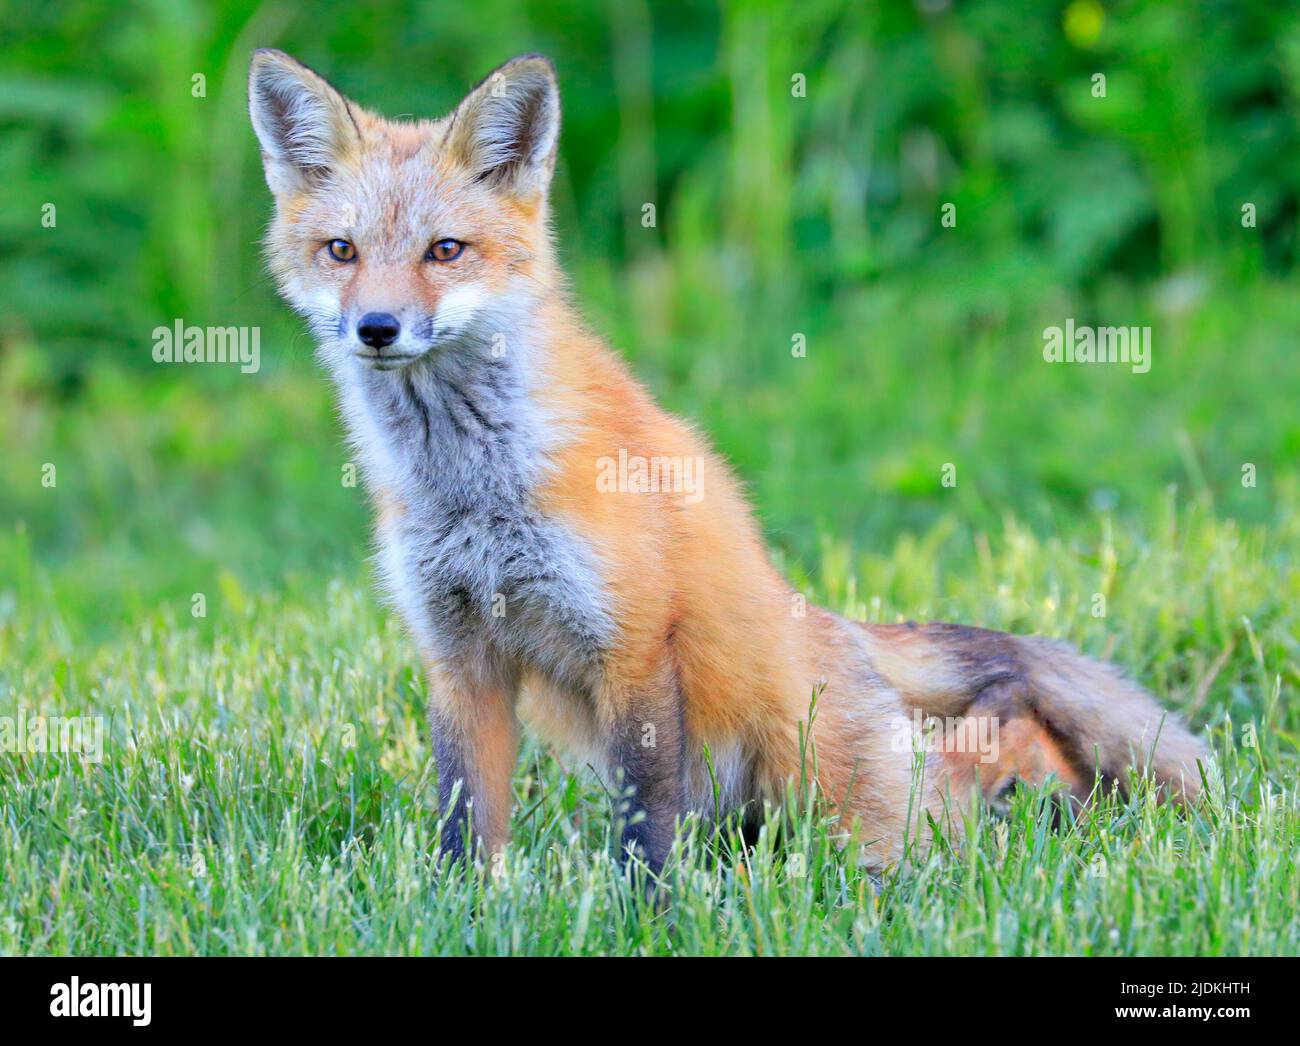 Young red fox portrait with green foreground and background Stock Photo